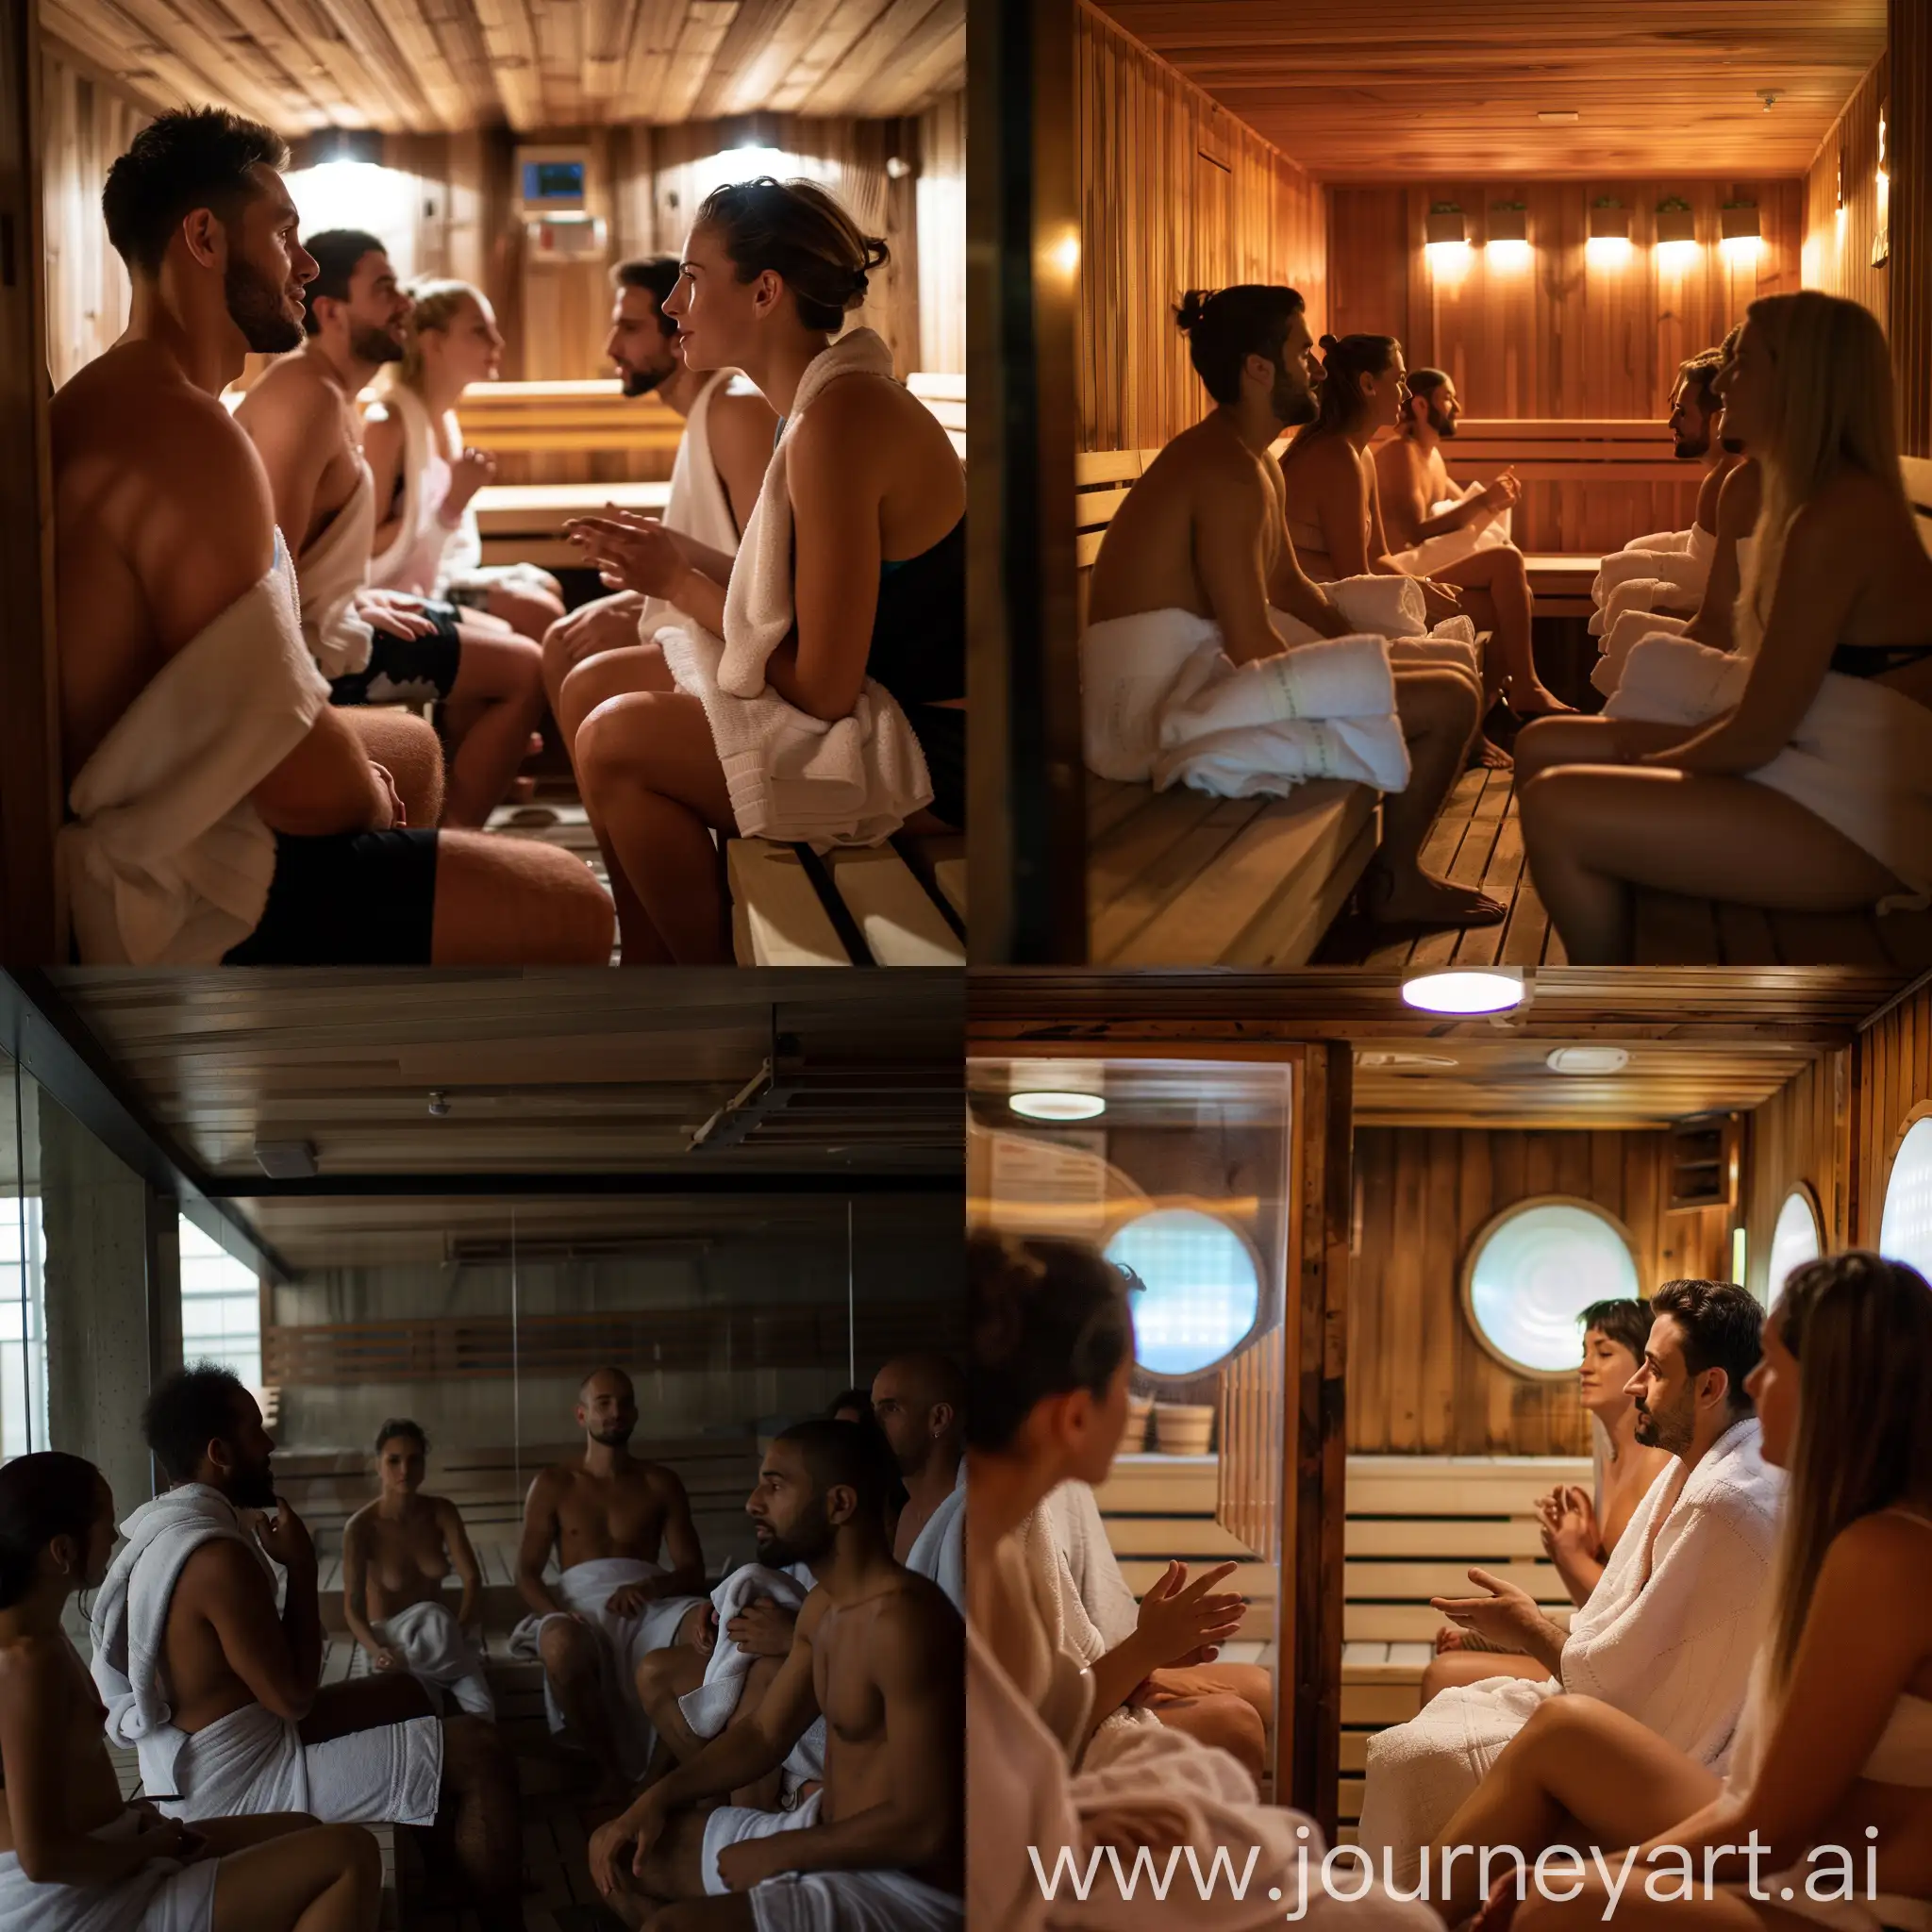 Serious-Conversation-in-Sauna-Intimate-Discussion-Among-TowelClad-Friends